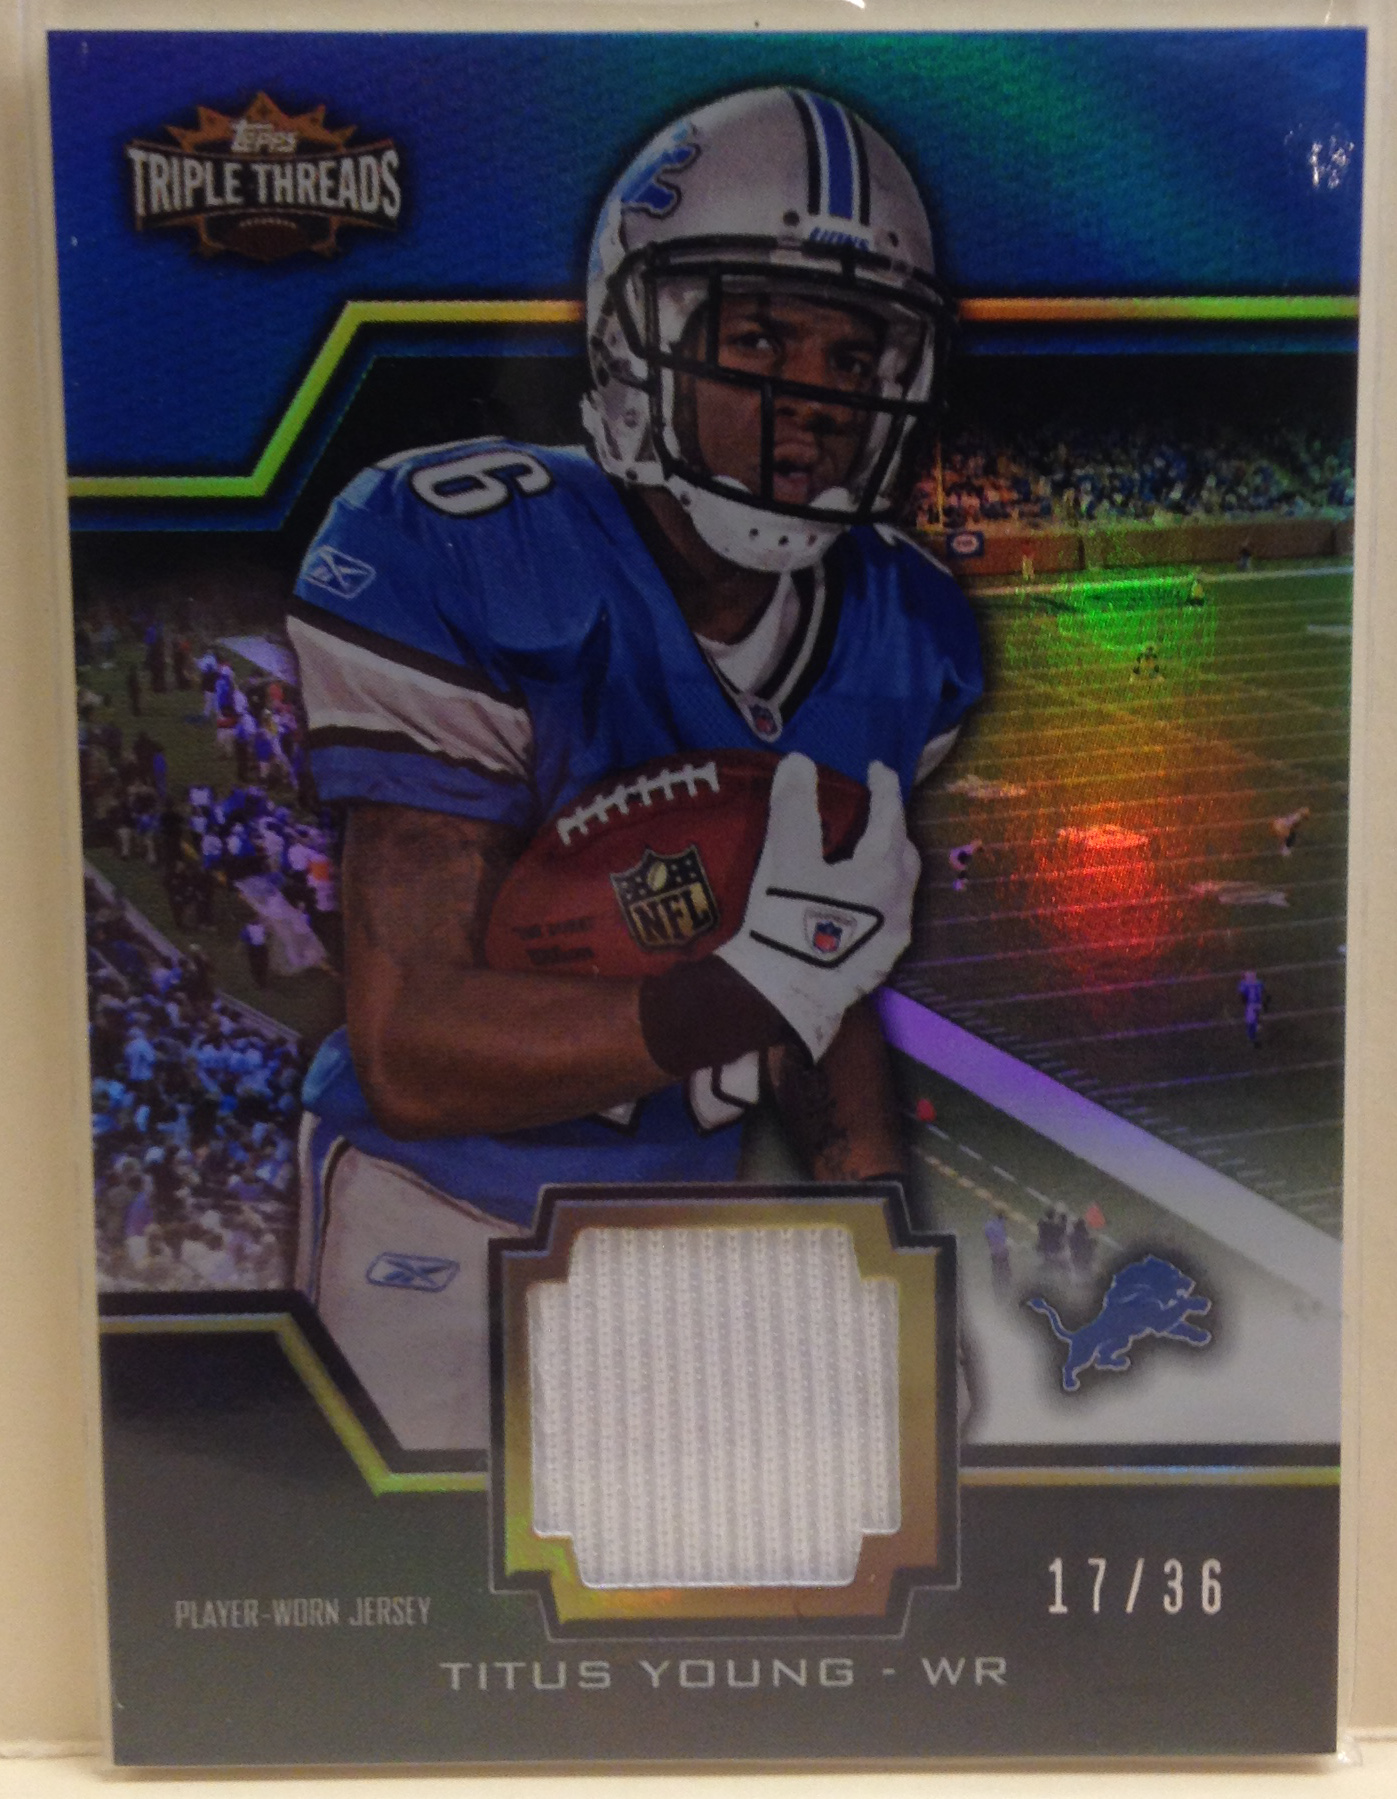 2011 Topps Triple Threads Unity Relics #TTUSR121 Titus Young